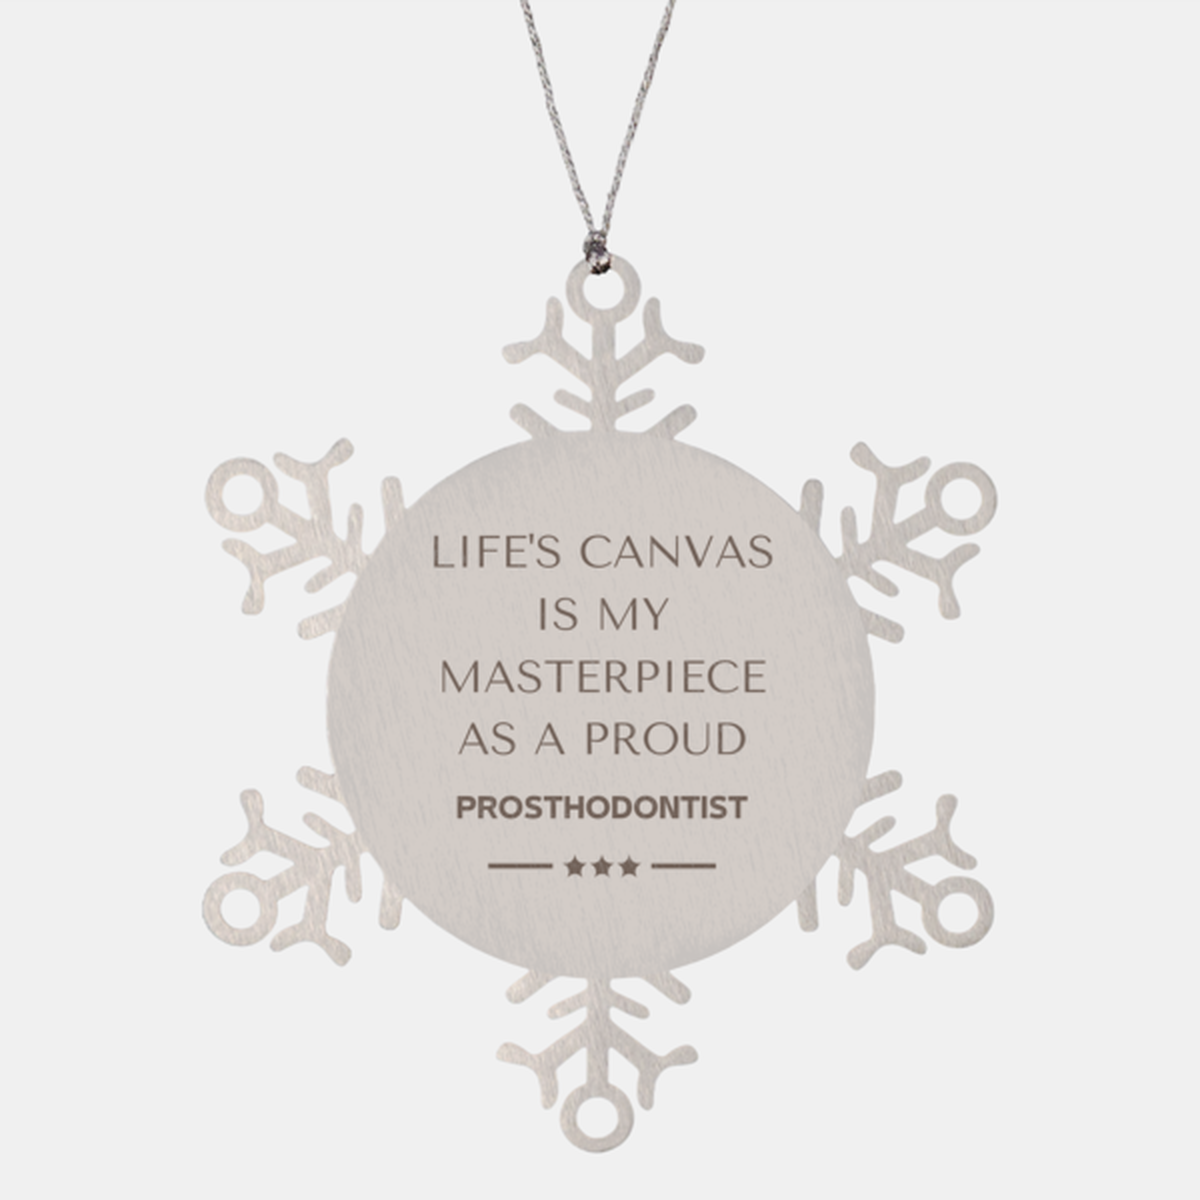 Proud Prosthodontist Gifts, Life's canvas is my masterpiece, Epic Birthday Christmas Unique Snowflake Ornament For Prosthodontist, Coworkers, Men, Women, Friends